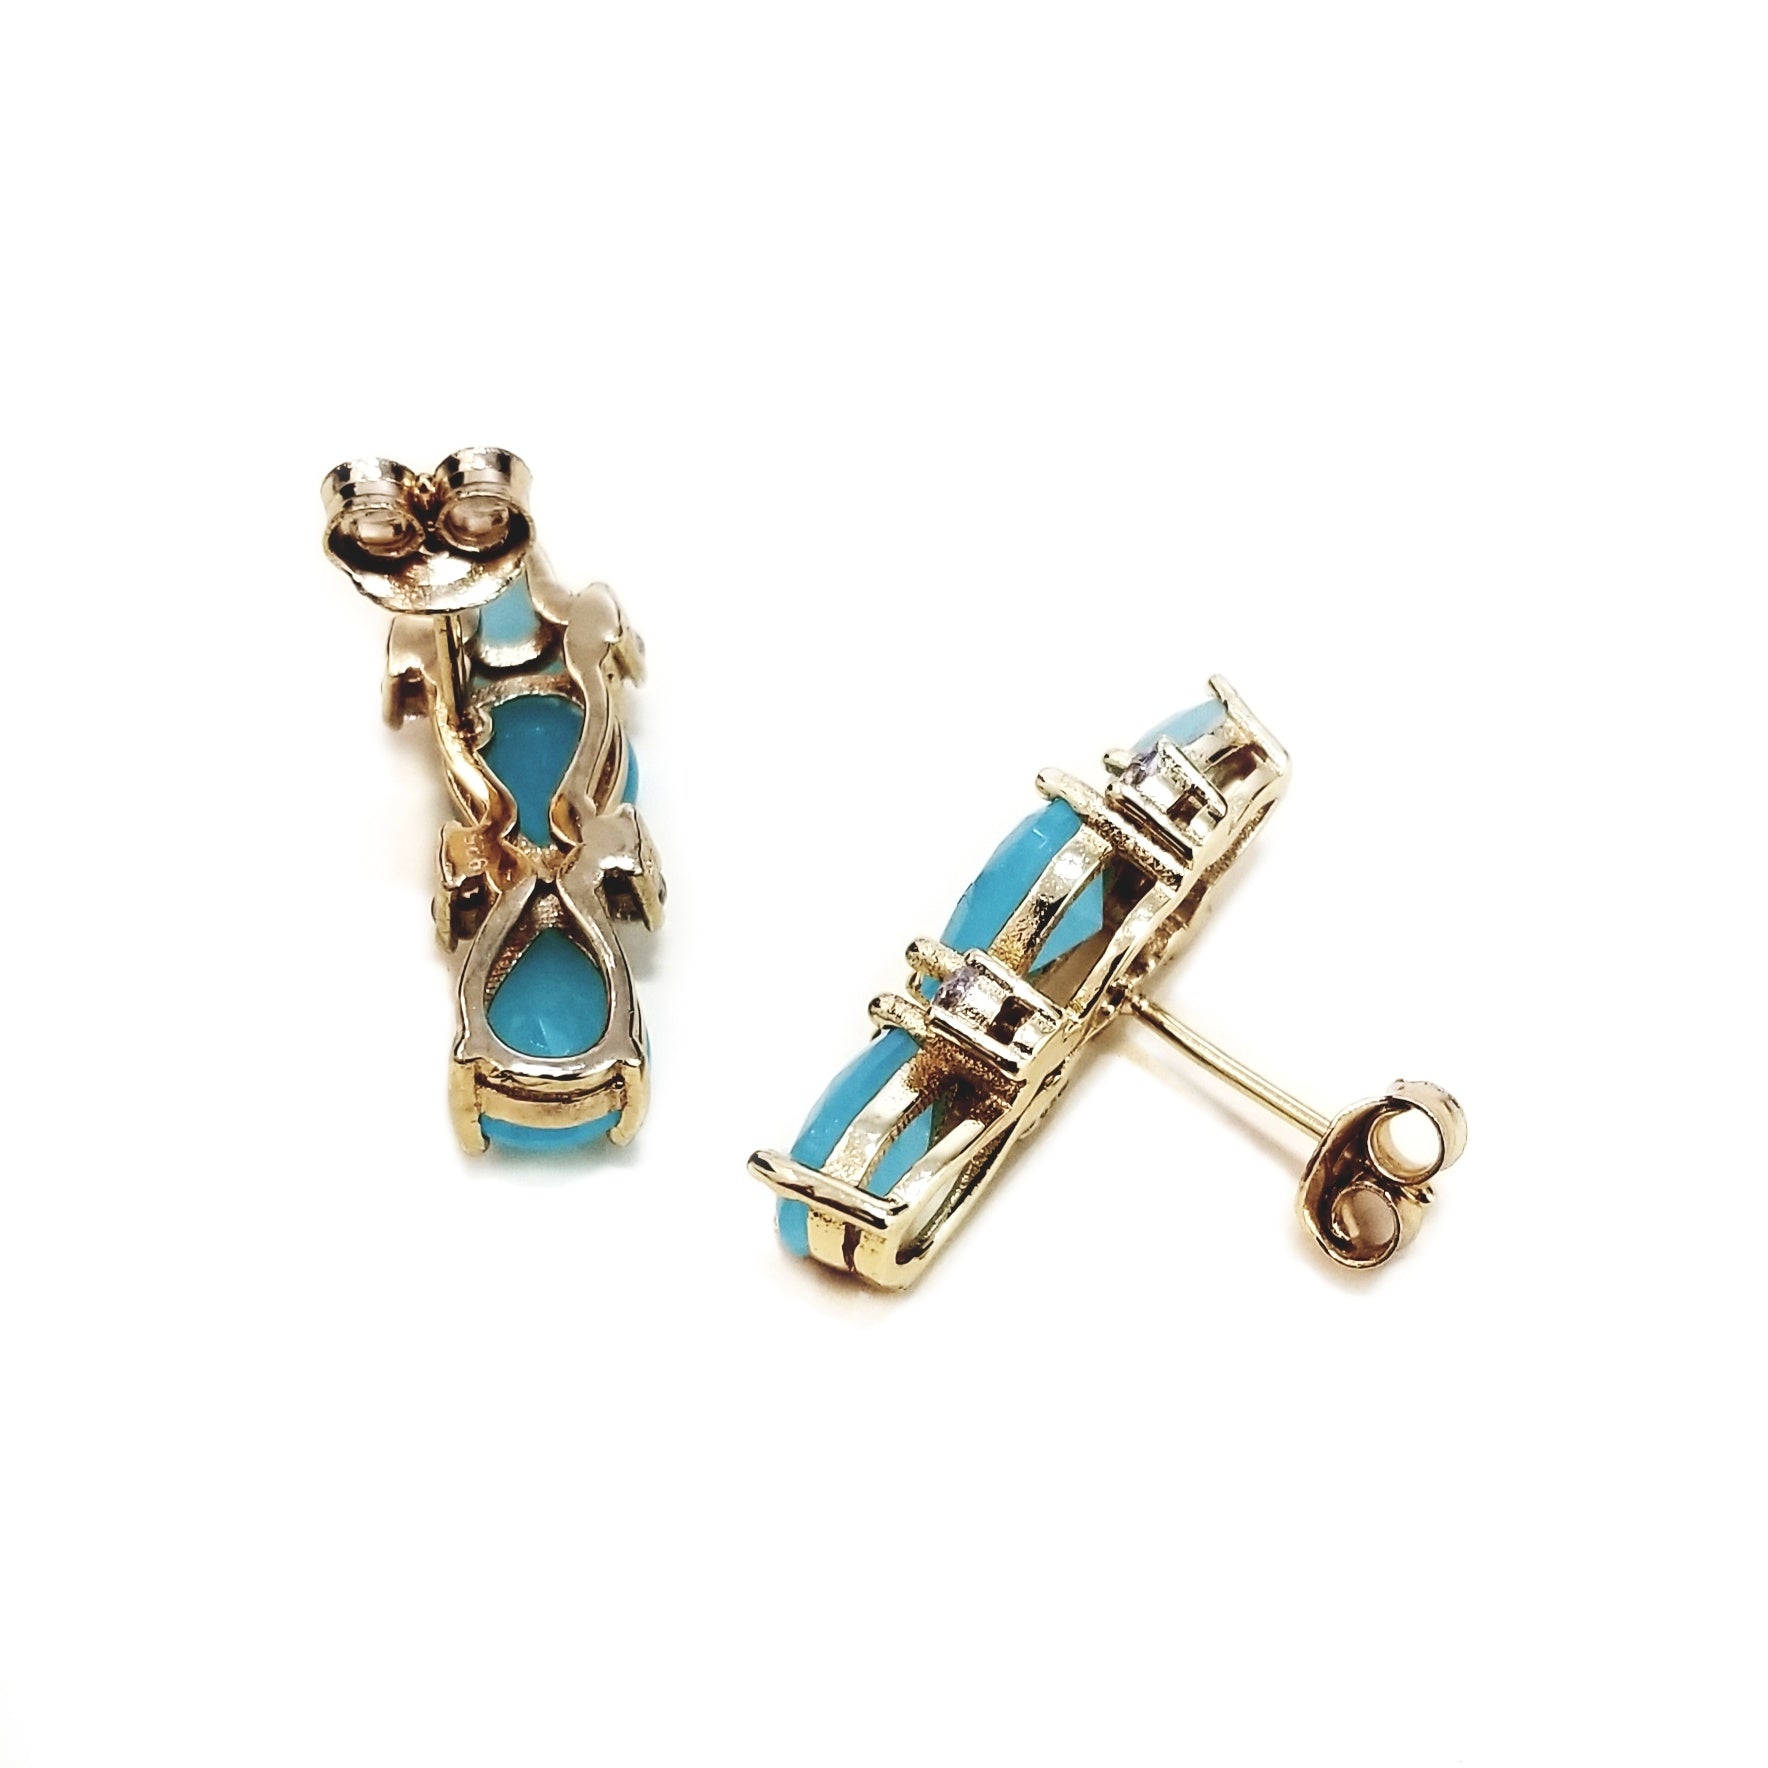 Earrings with blue crystals, zirconia and silver